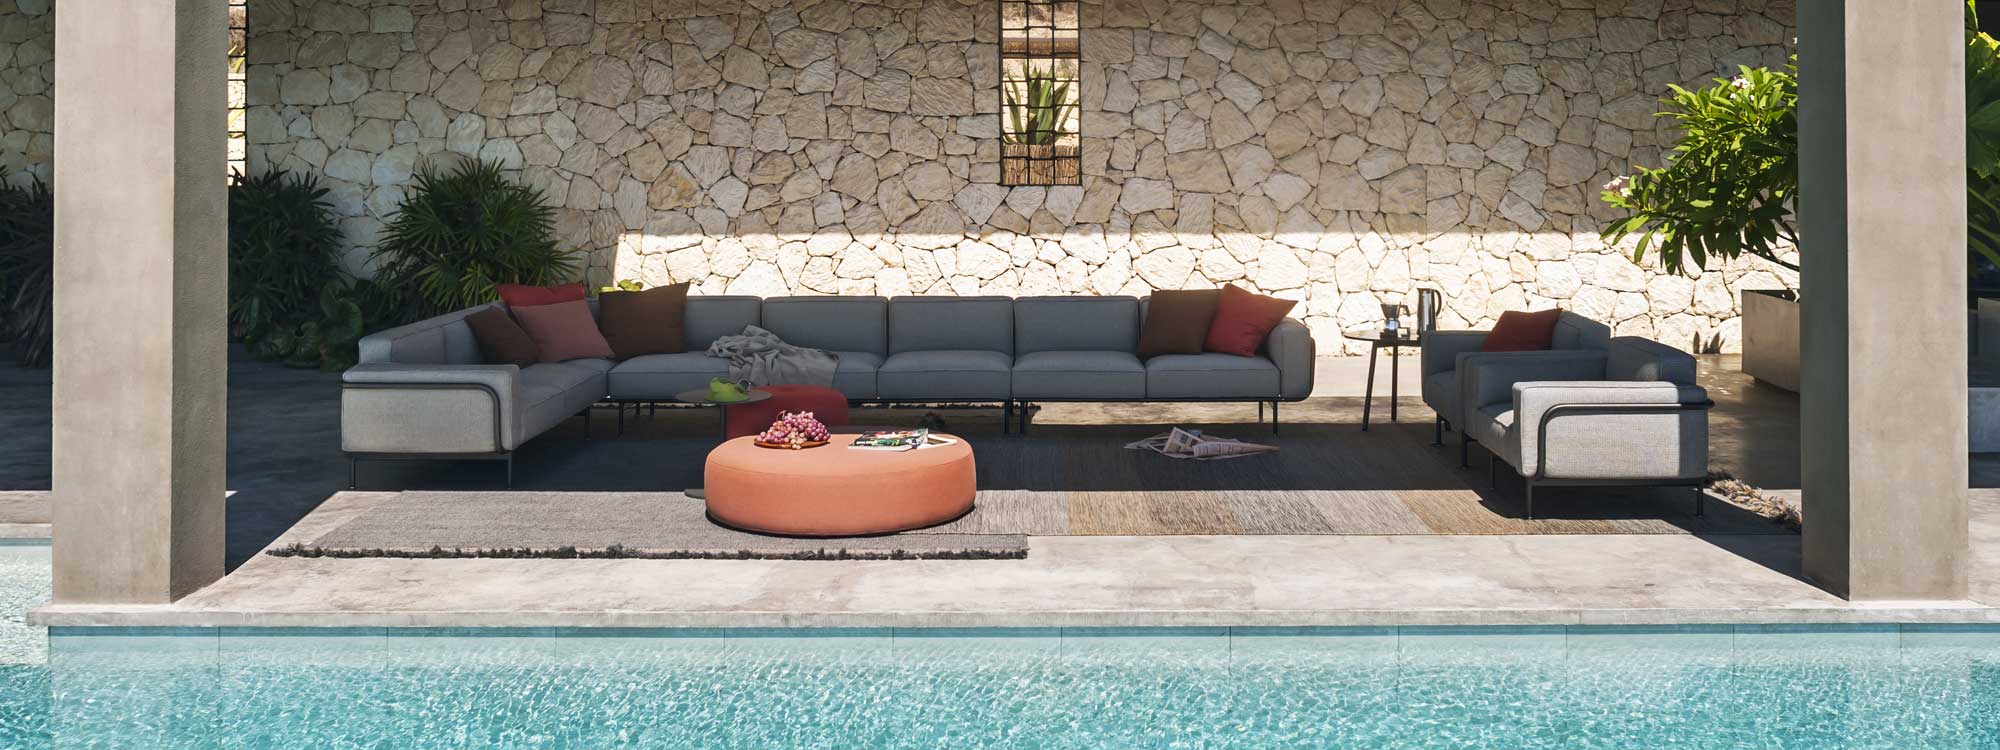 Image of Estendo large outdoor corner sofa and lounge chairs and Double circular garden pouf by RODA, shown on poolside terrace in the shade